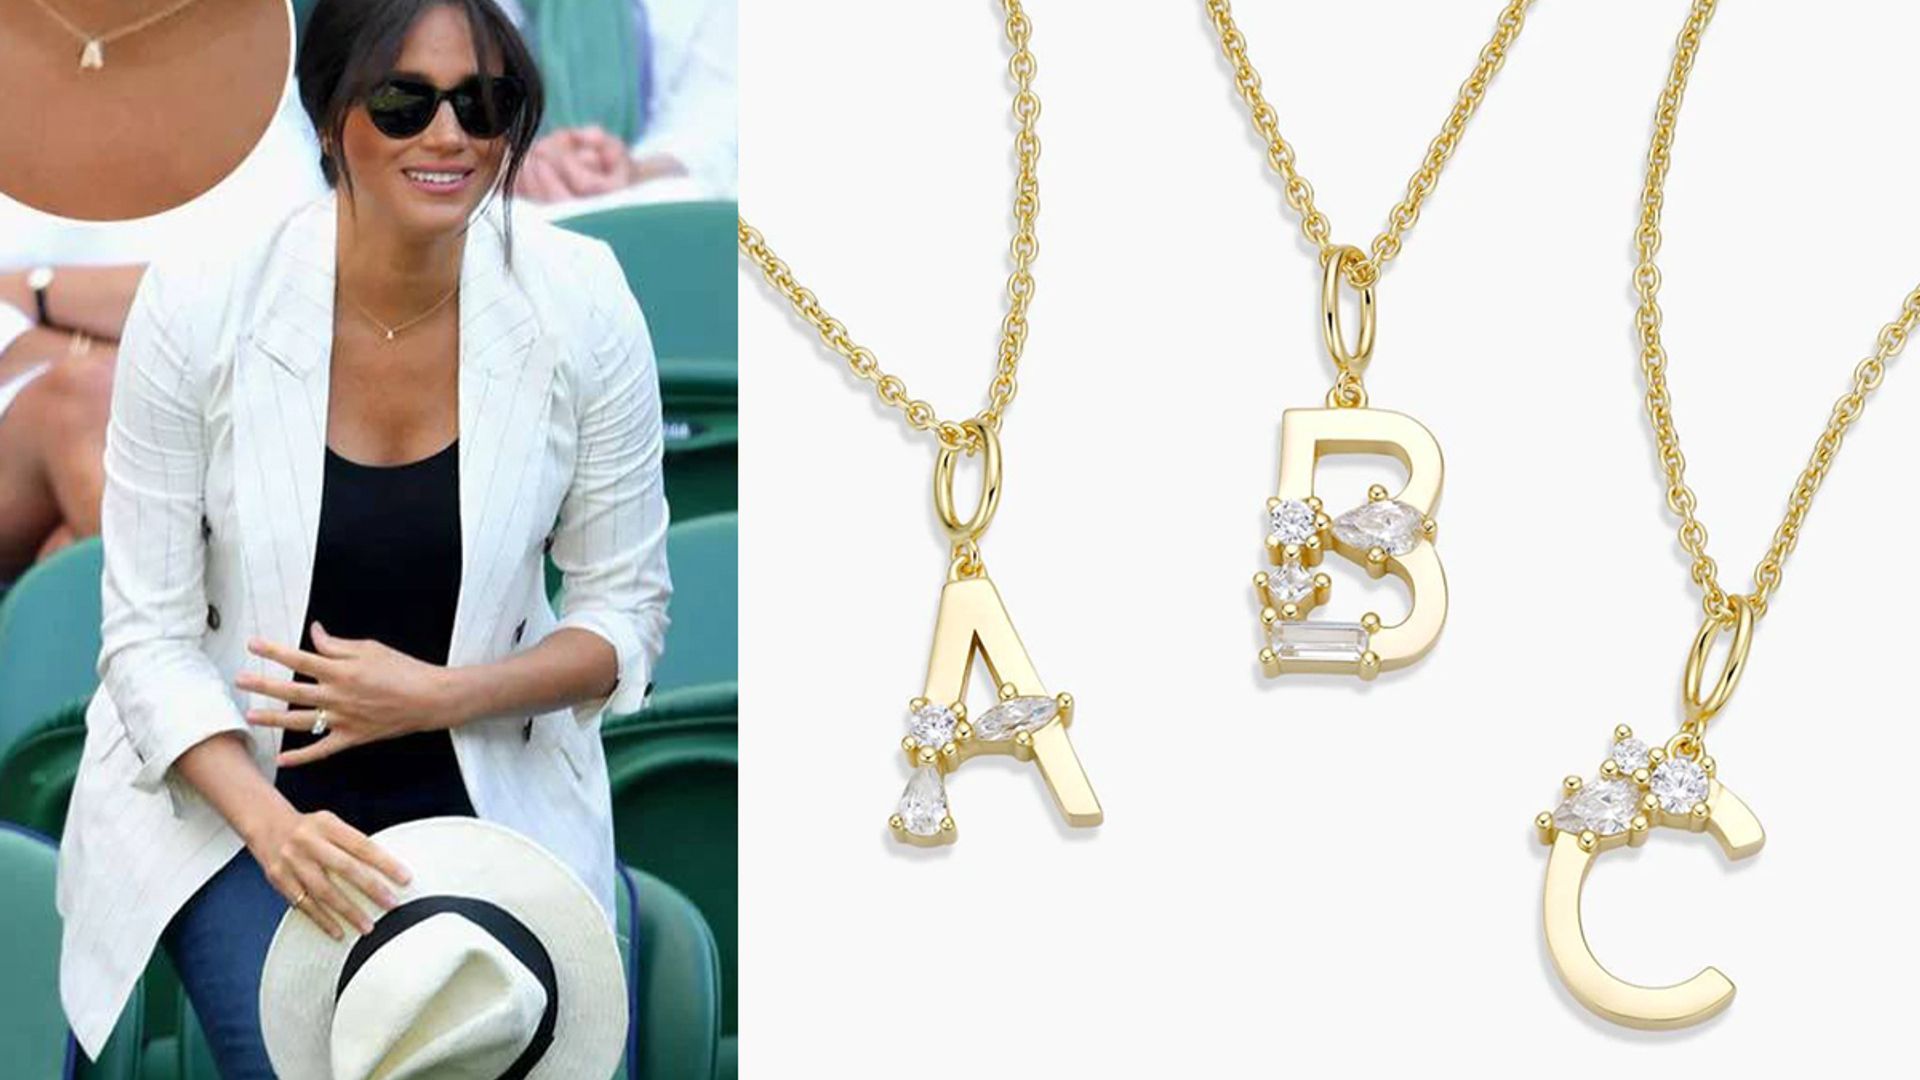 Chunky Letter Necklace - Hey Harper: The Original Waterproof Jewelry Brand